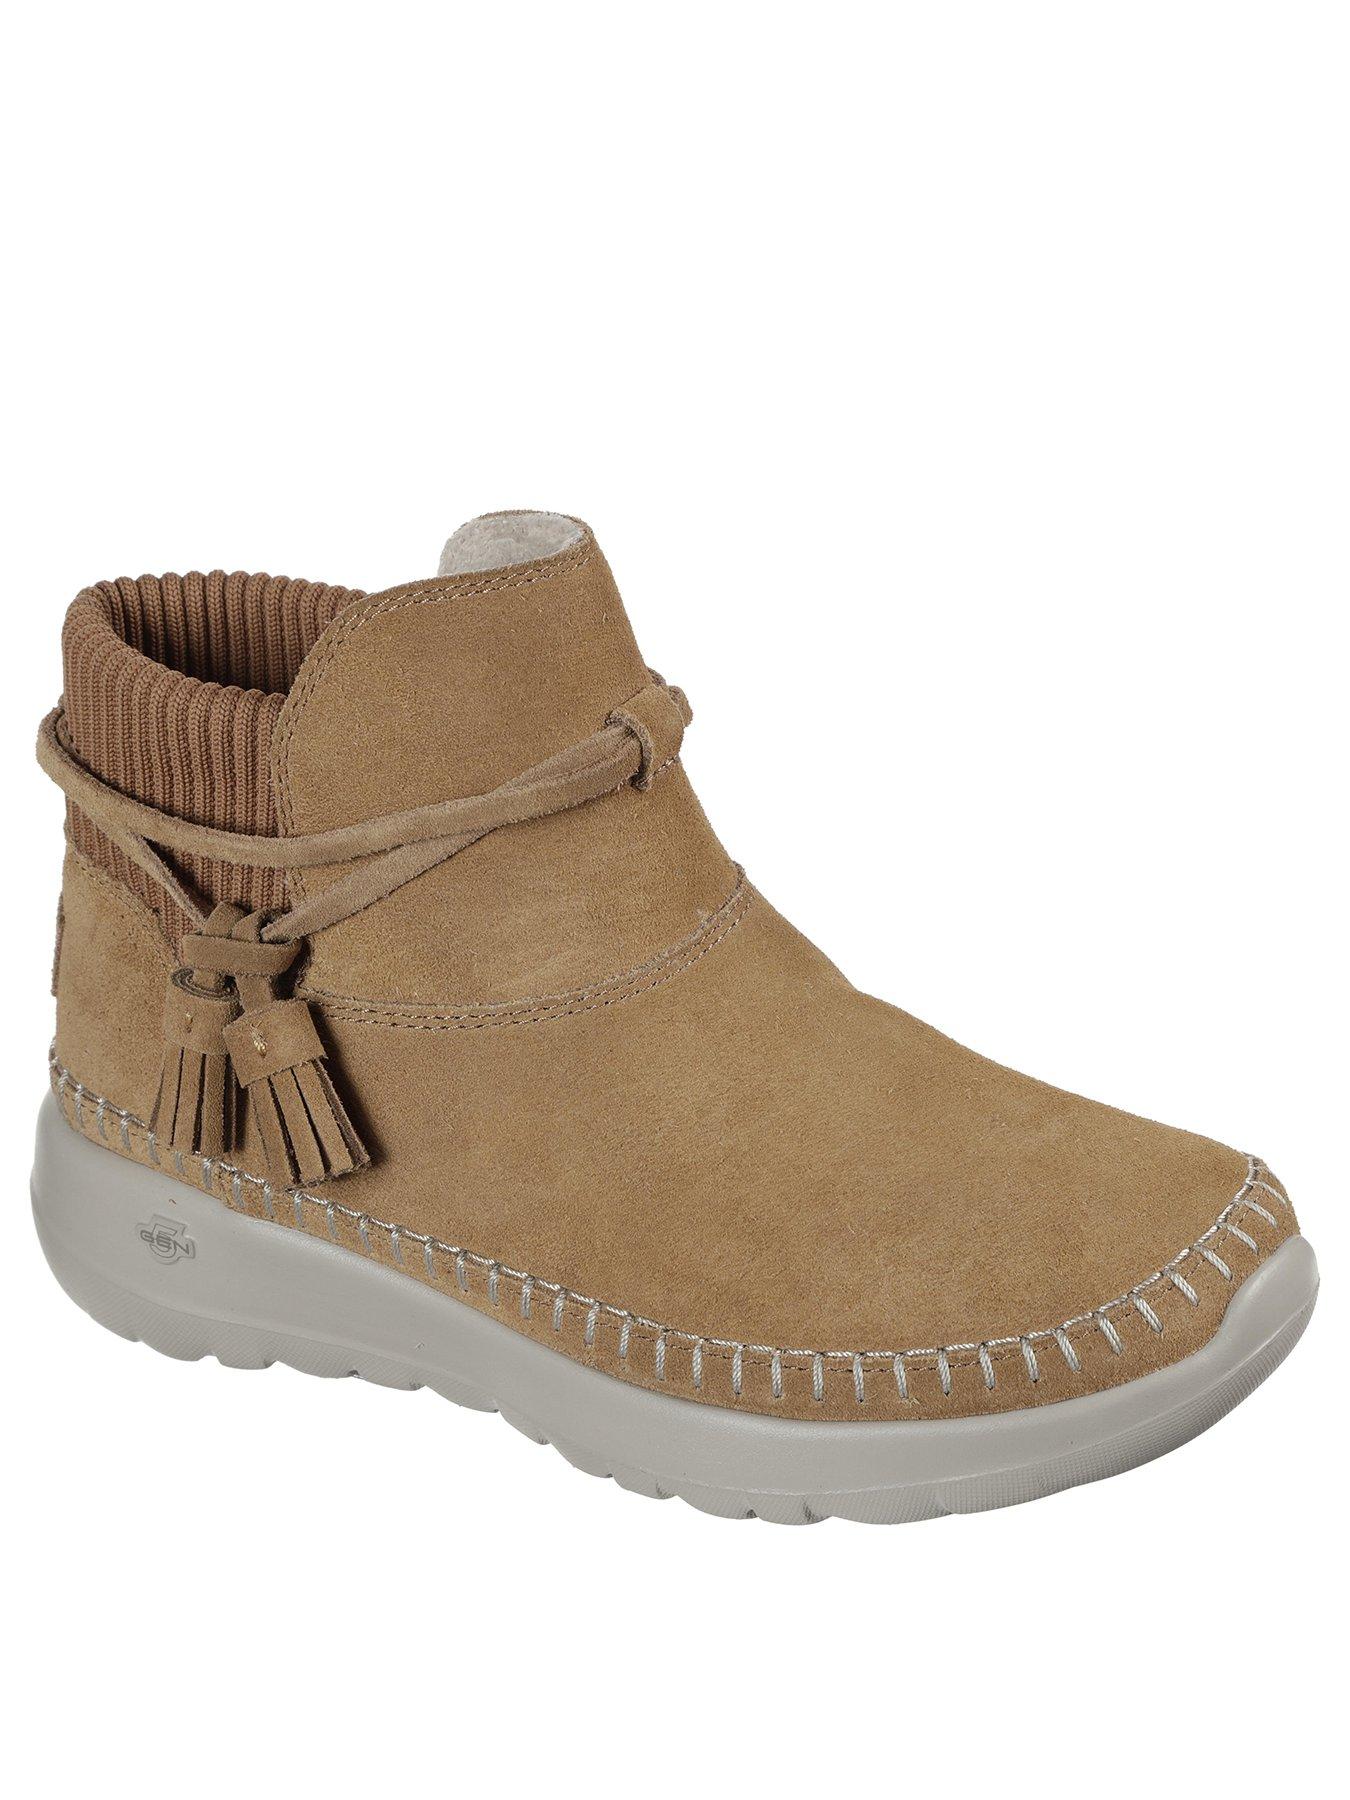 Womens Skechers Boots at Very.co.uk